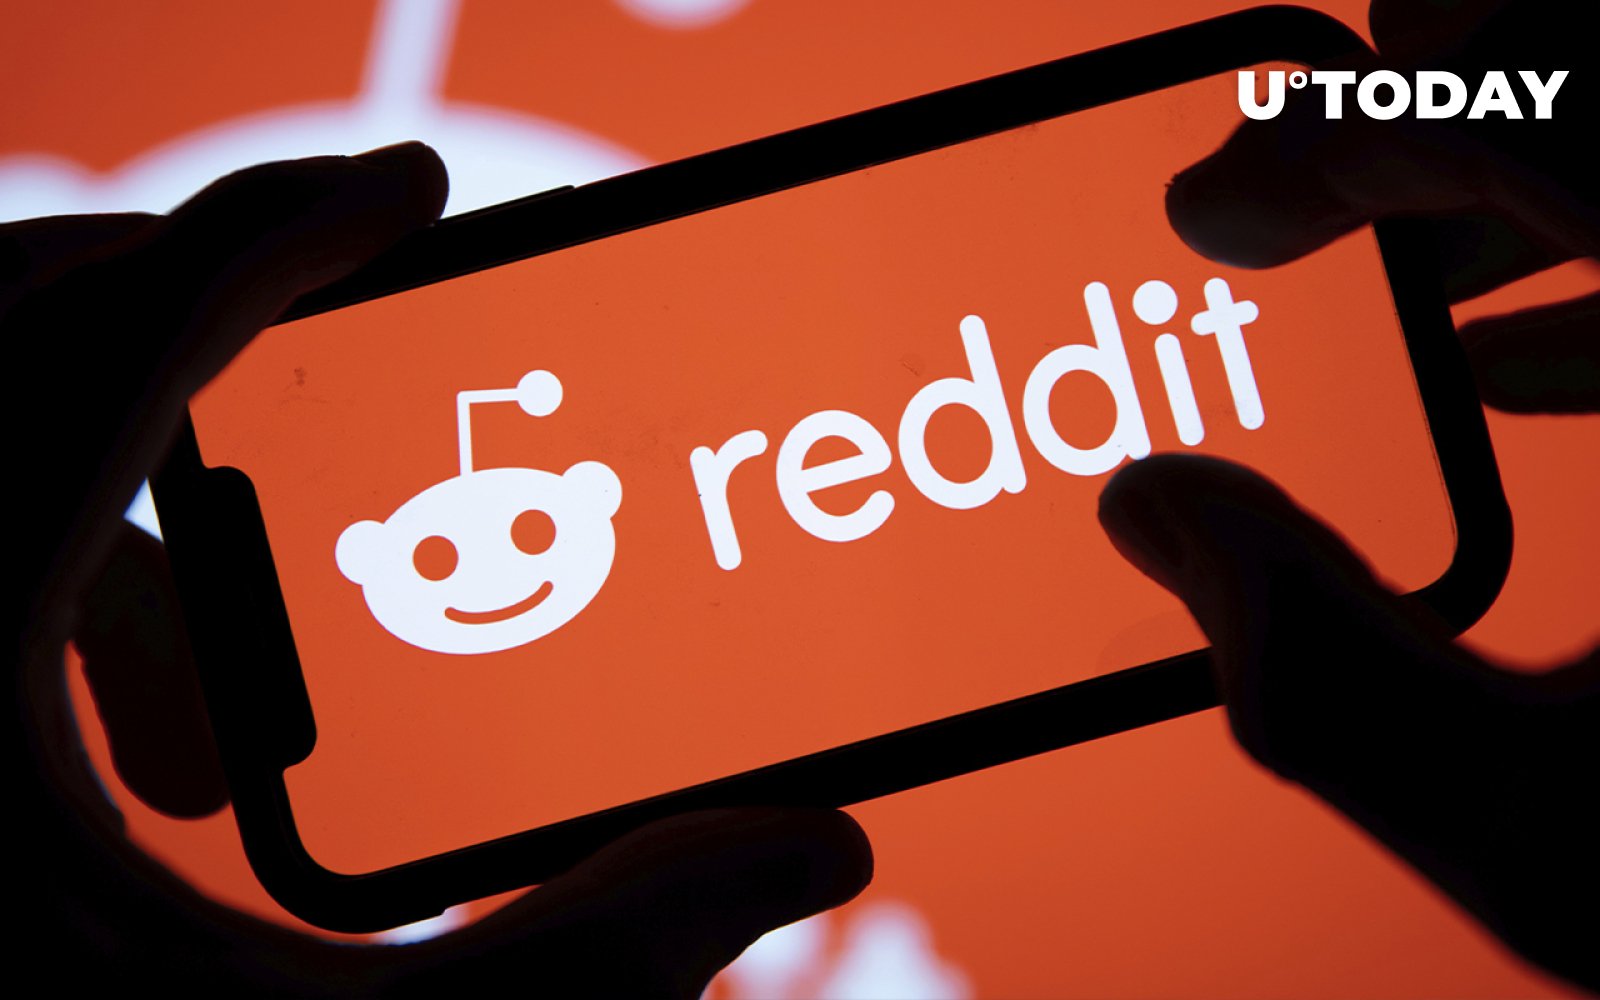 Crypto: Reddit Goes Big and Invests in Bitcoin and Ethereum!